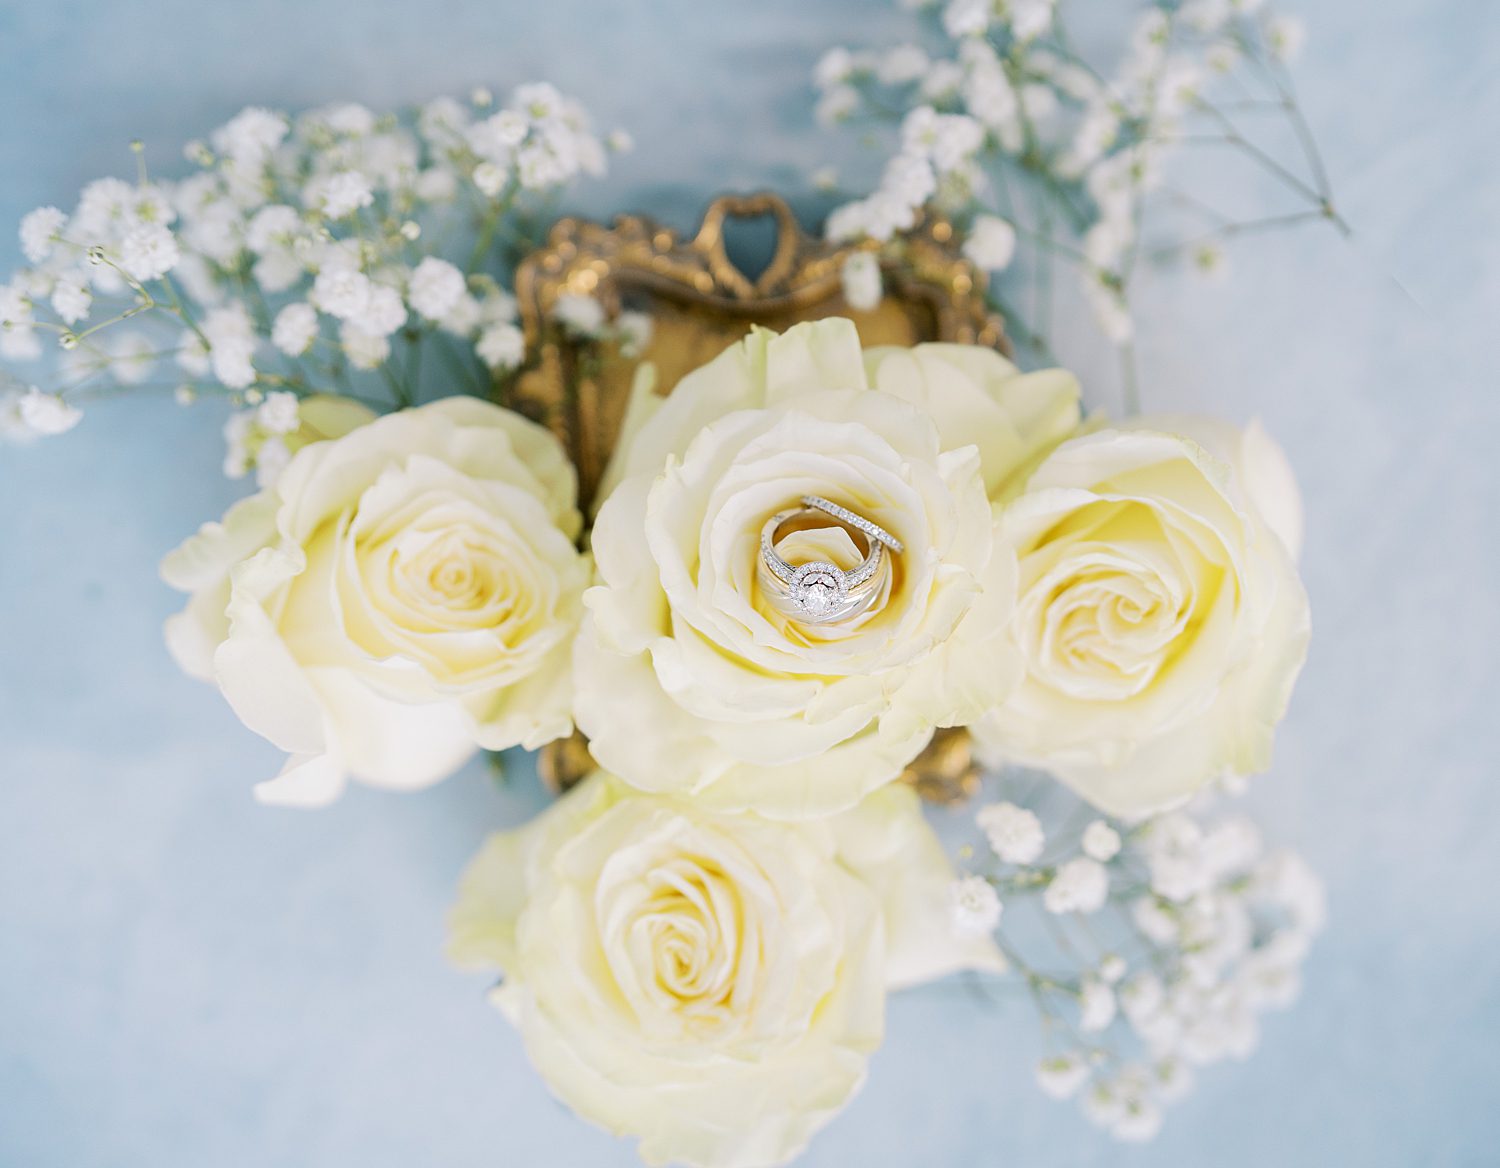 diamond ring rests in ivory roses on gold tray